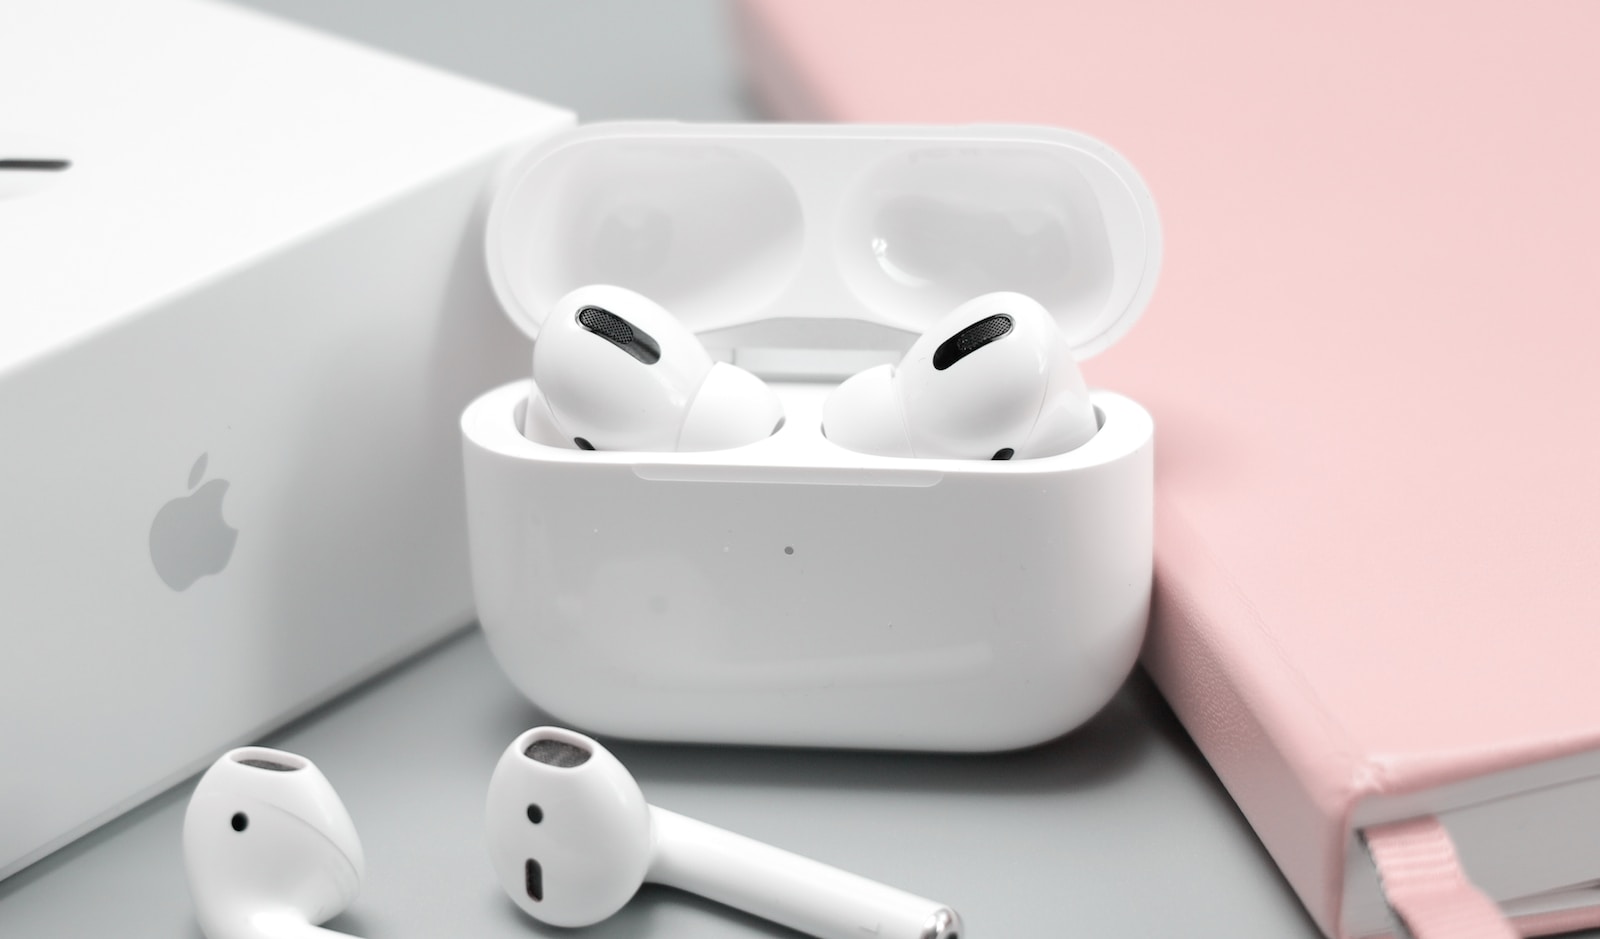 
Can AirPods Be Stolen and Used? Here's What You Need to Know